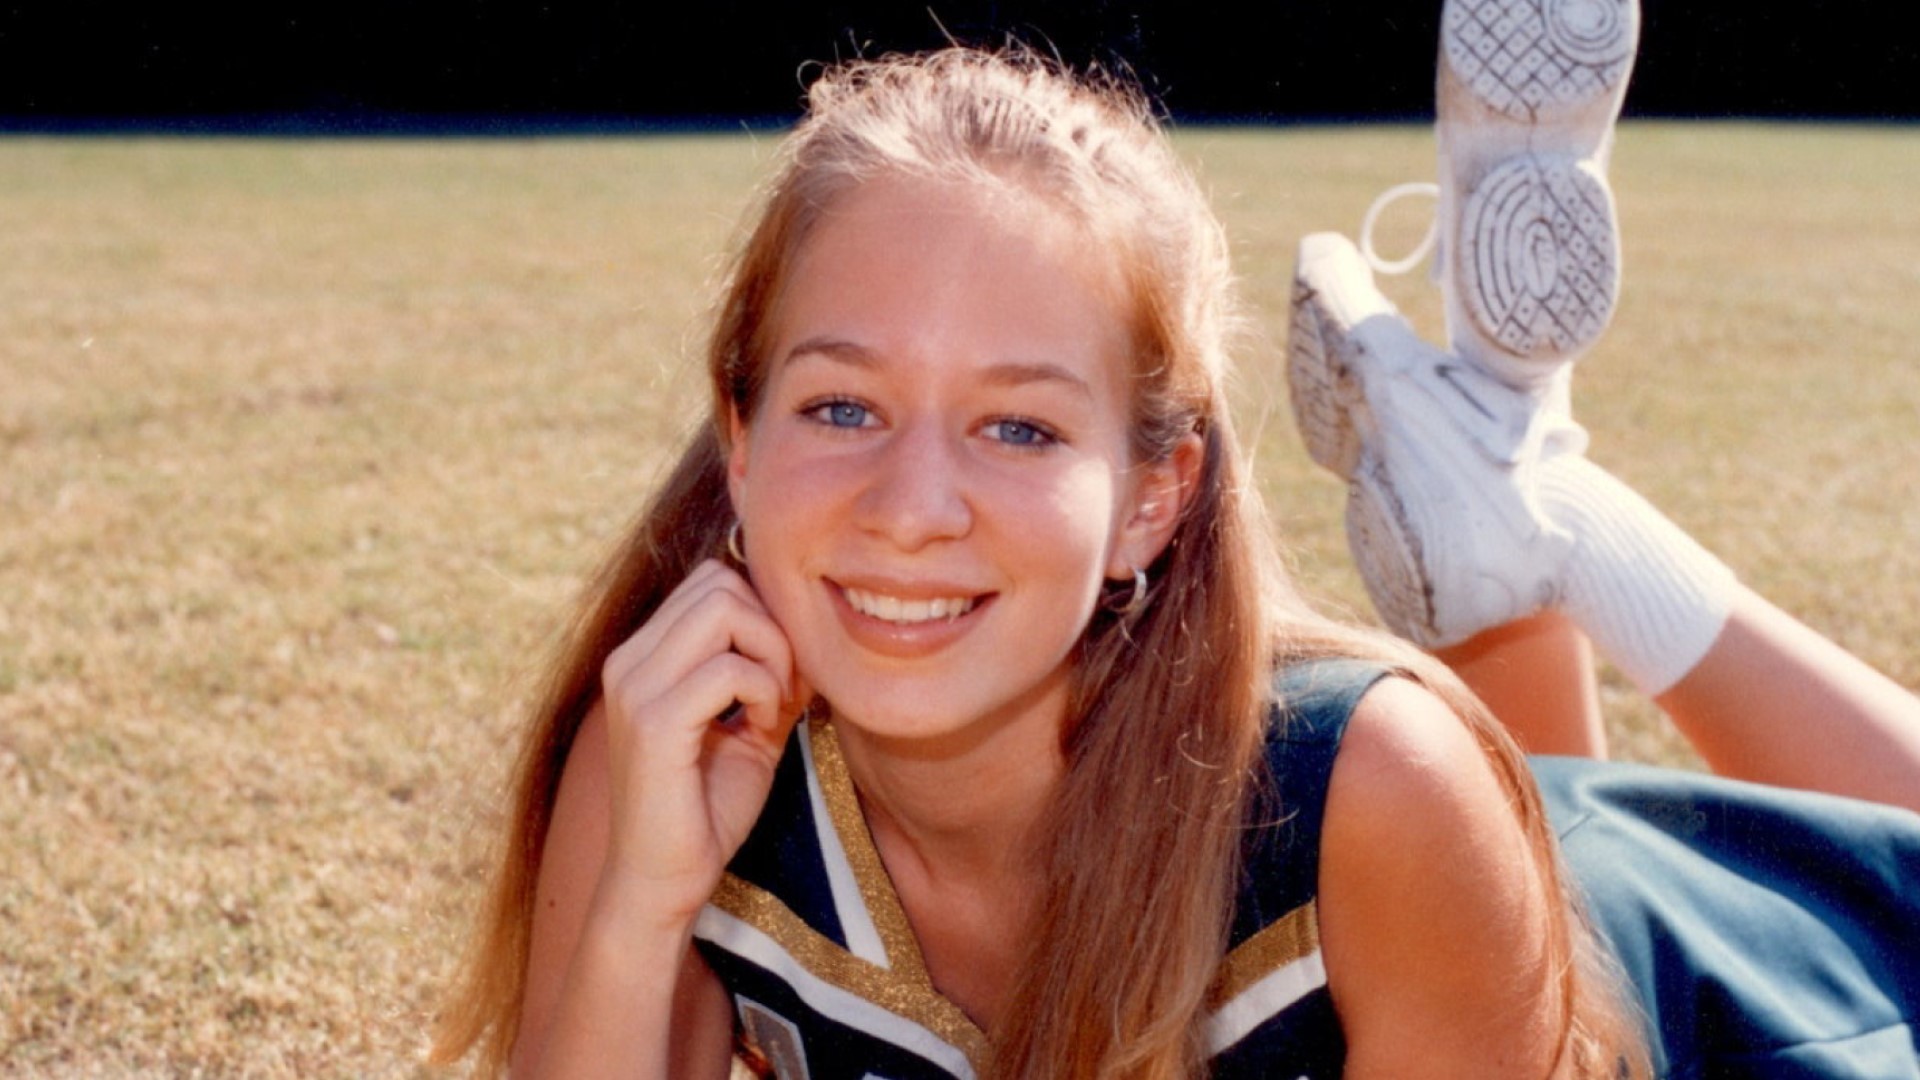 18 years after her disappearance, we know what happened to Natalee Holloway